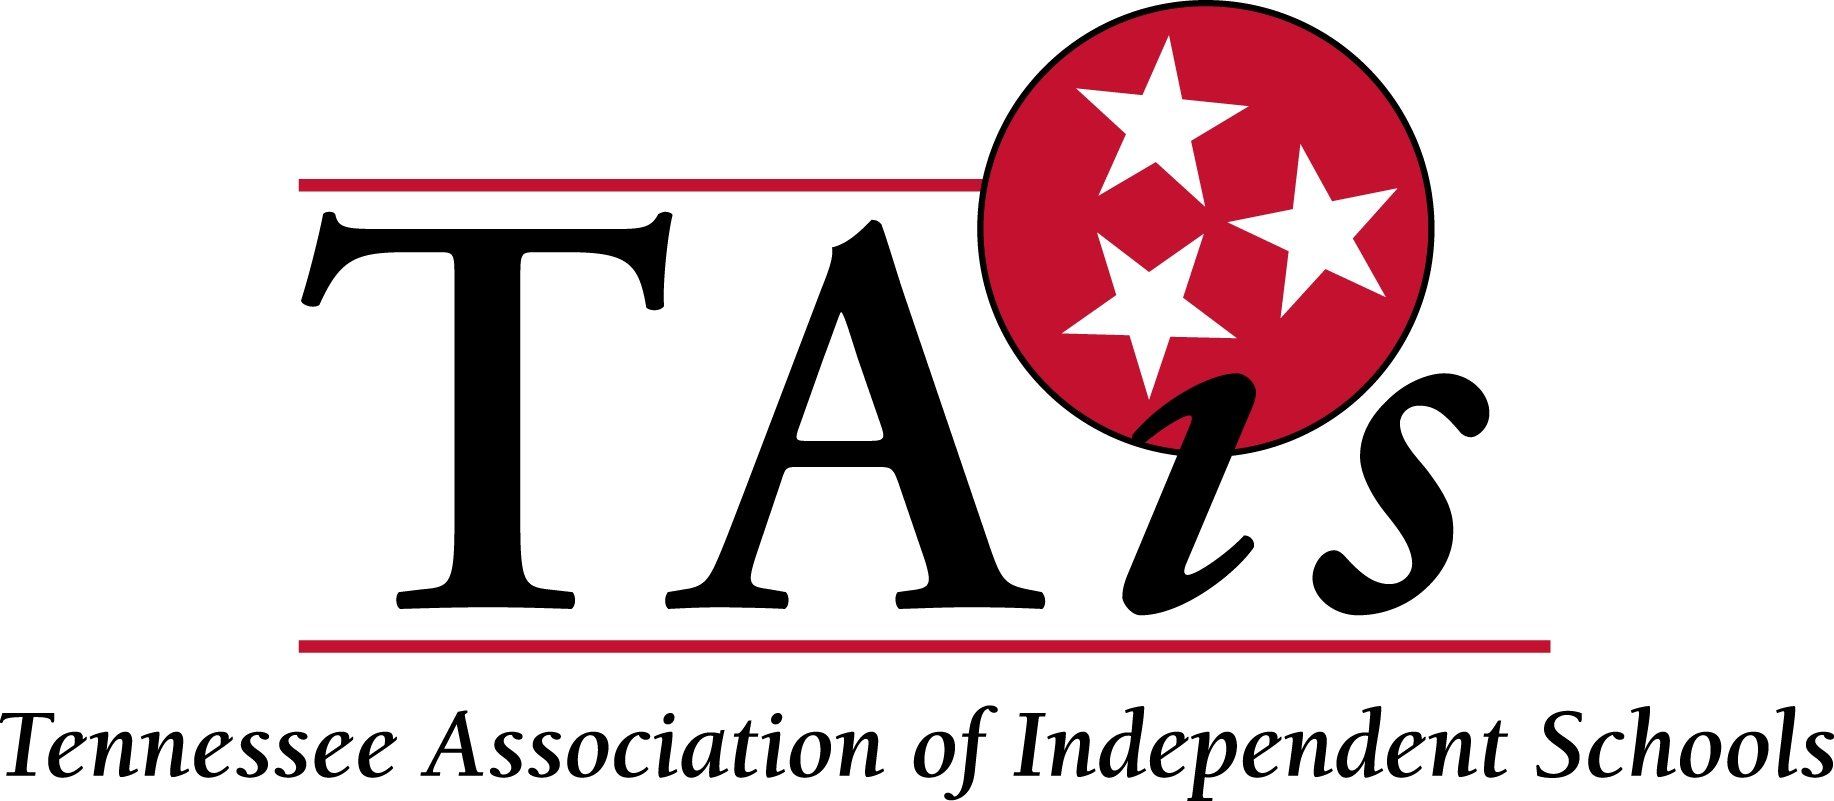 Tennessee associated of independent schools